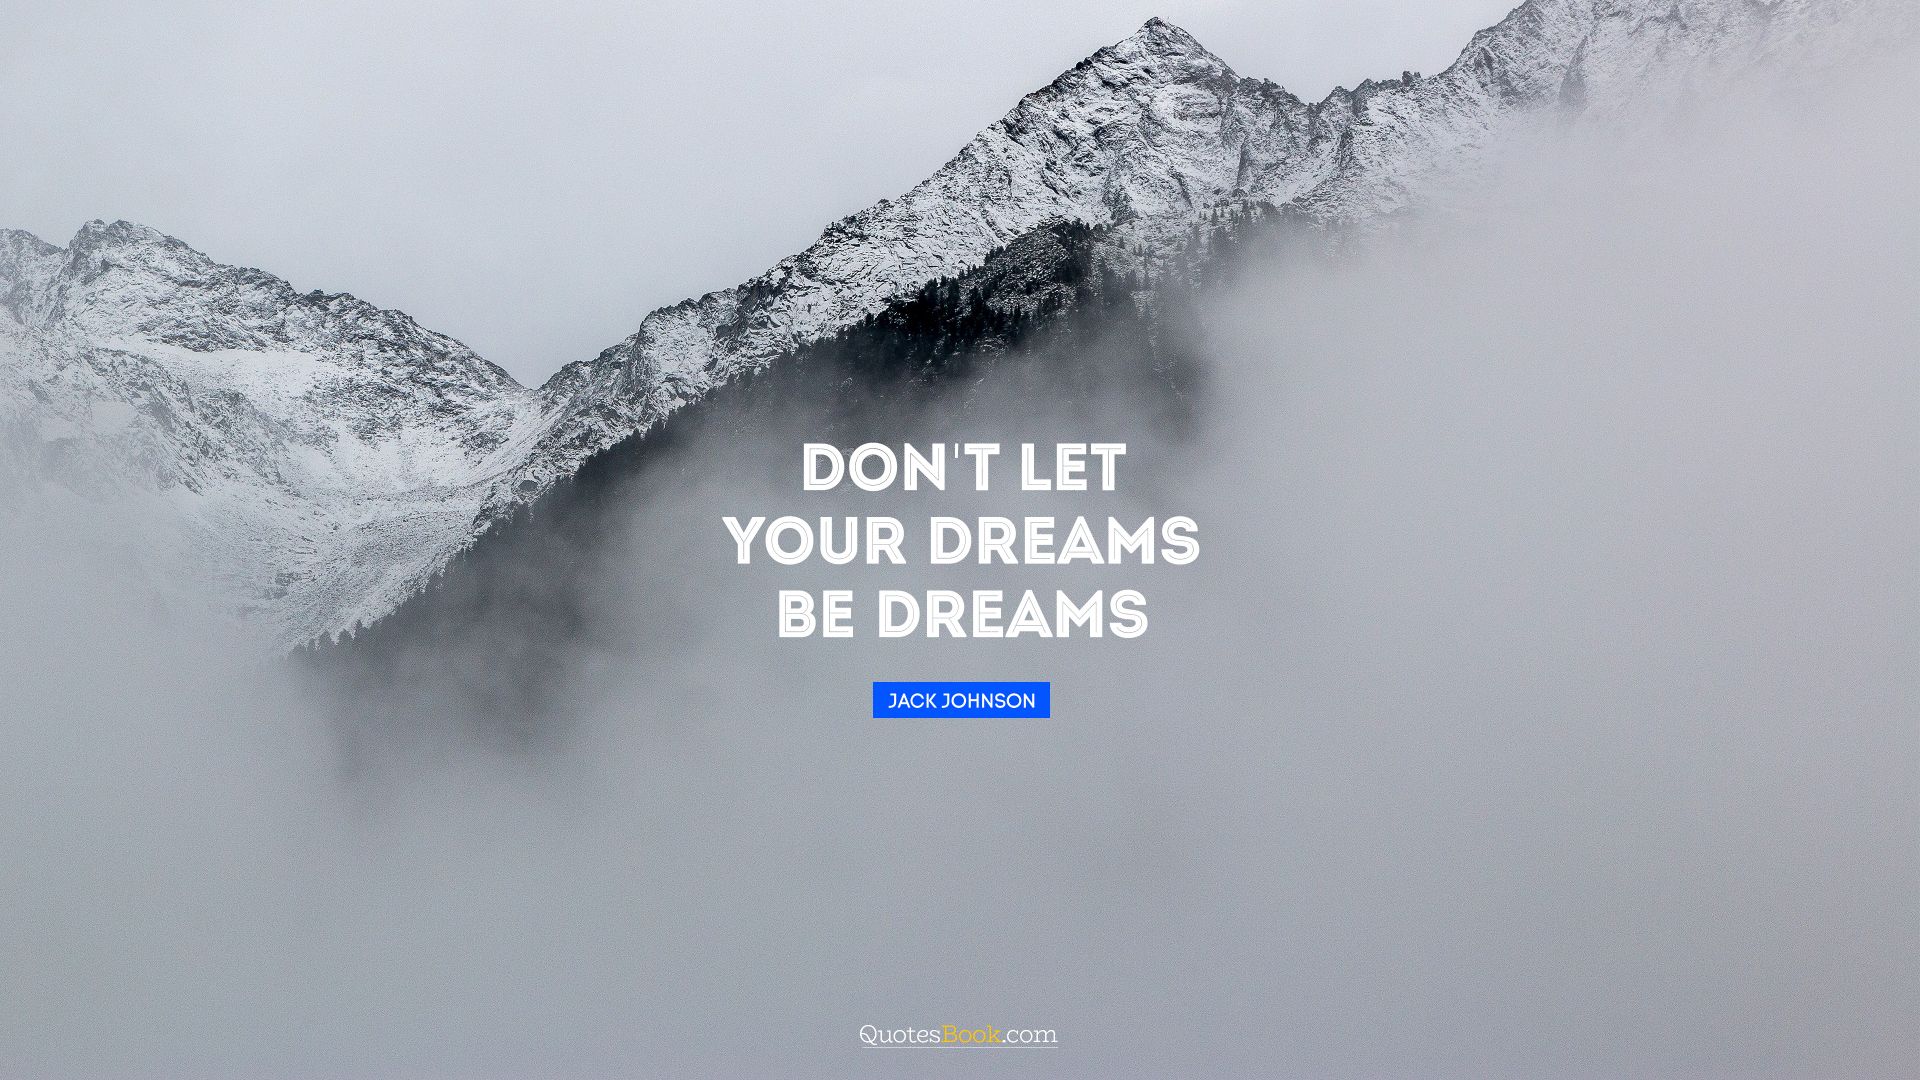 Don't let your dreams be dreams. - Quote by Jack Johnson